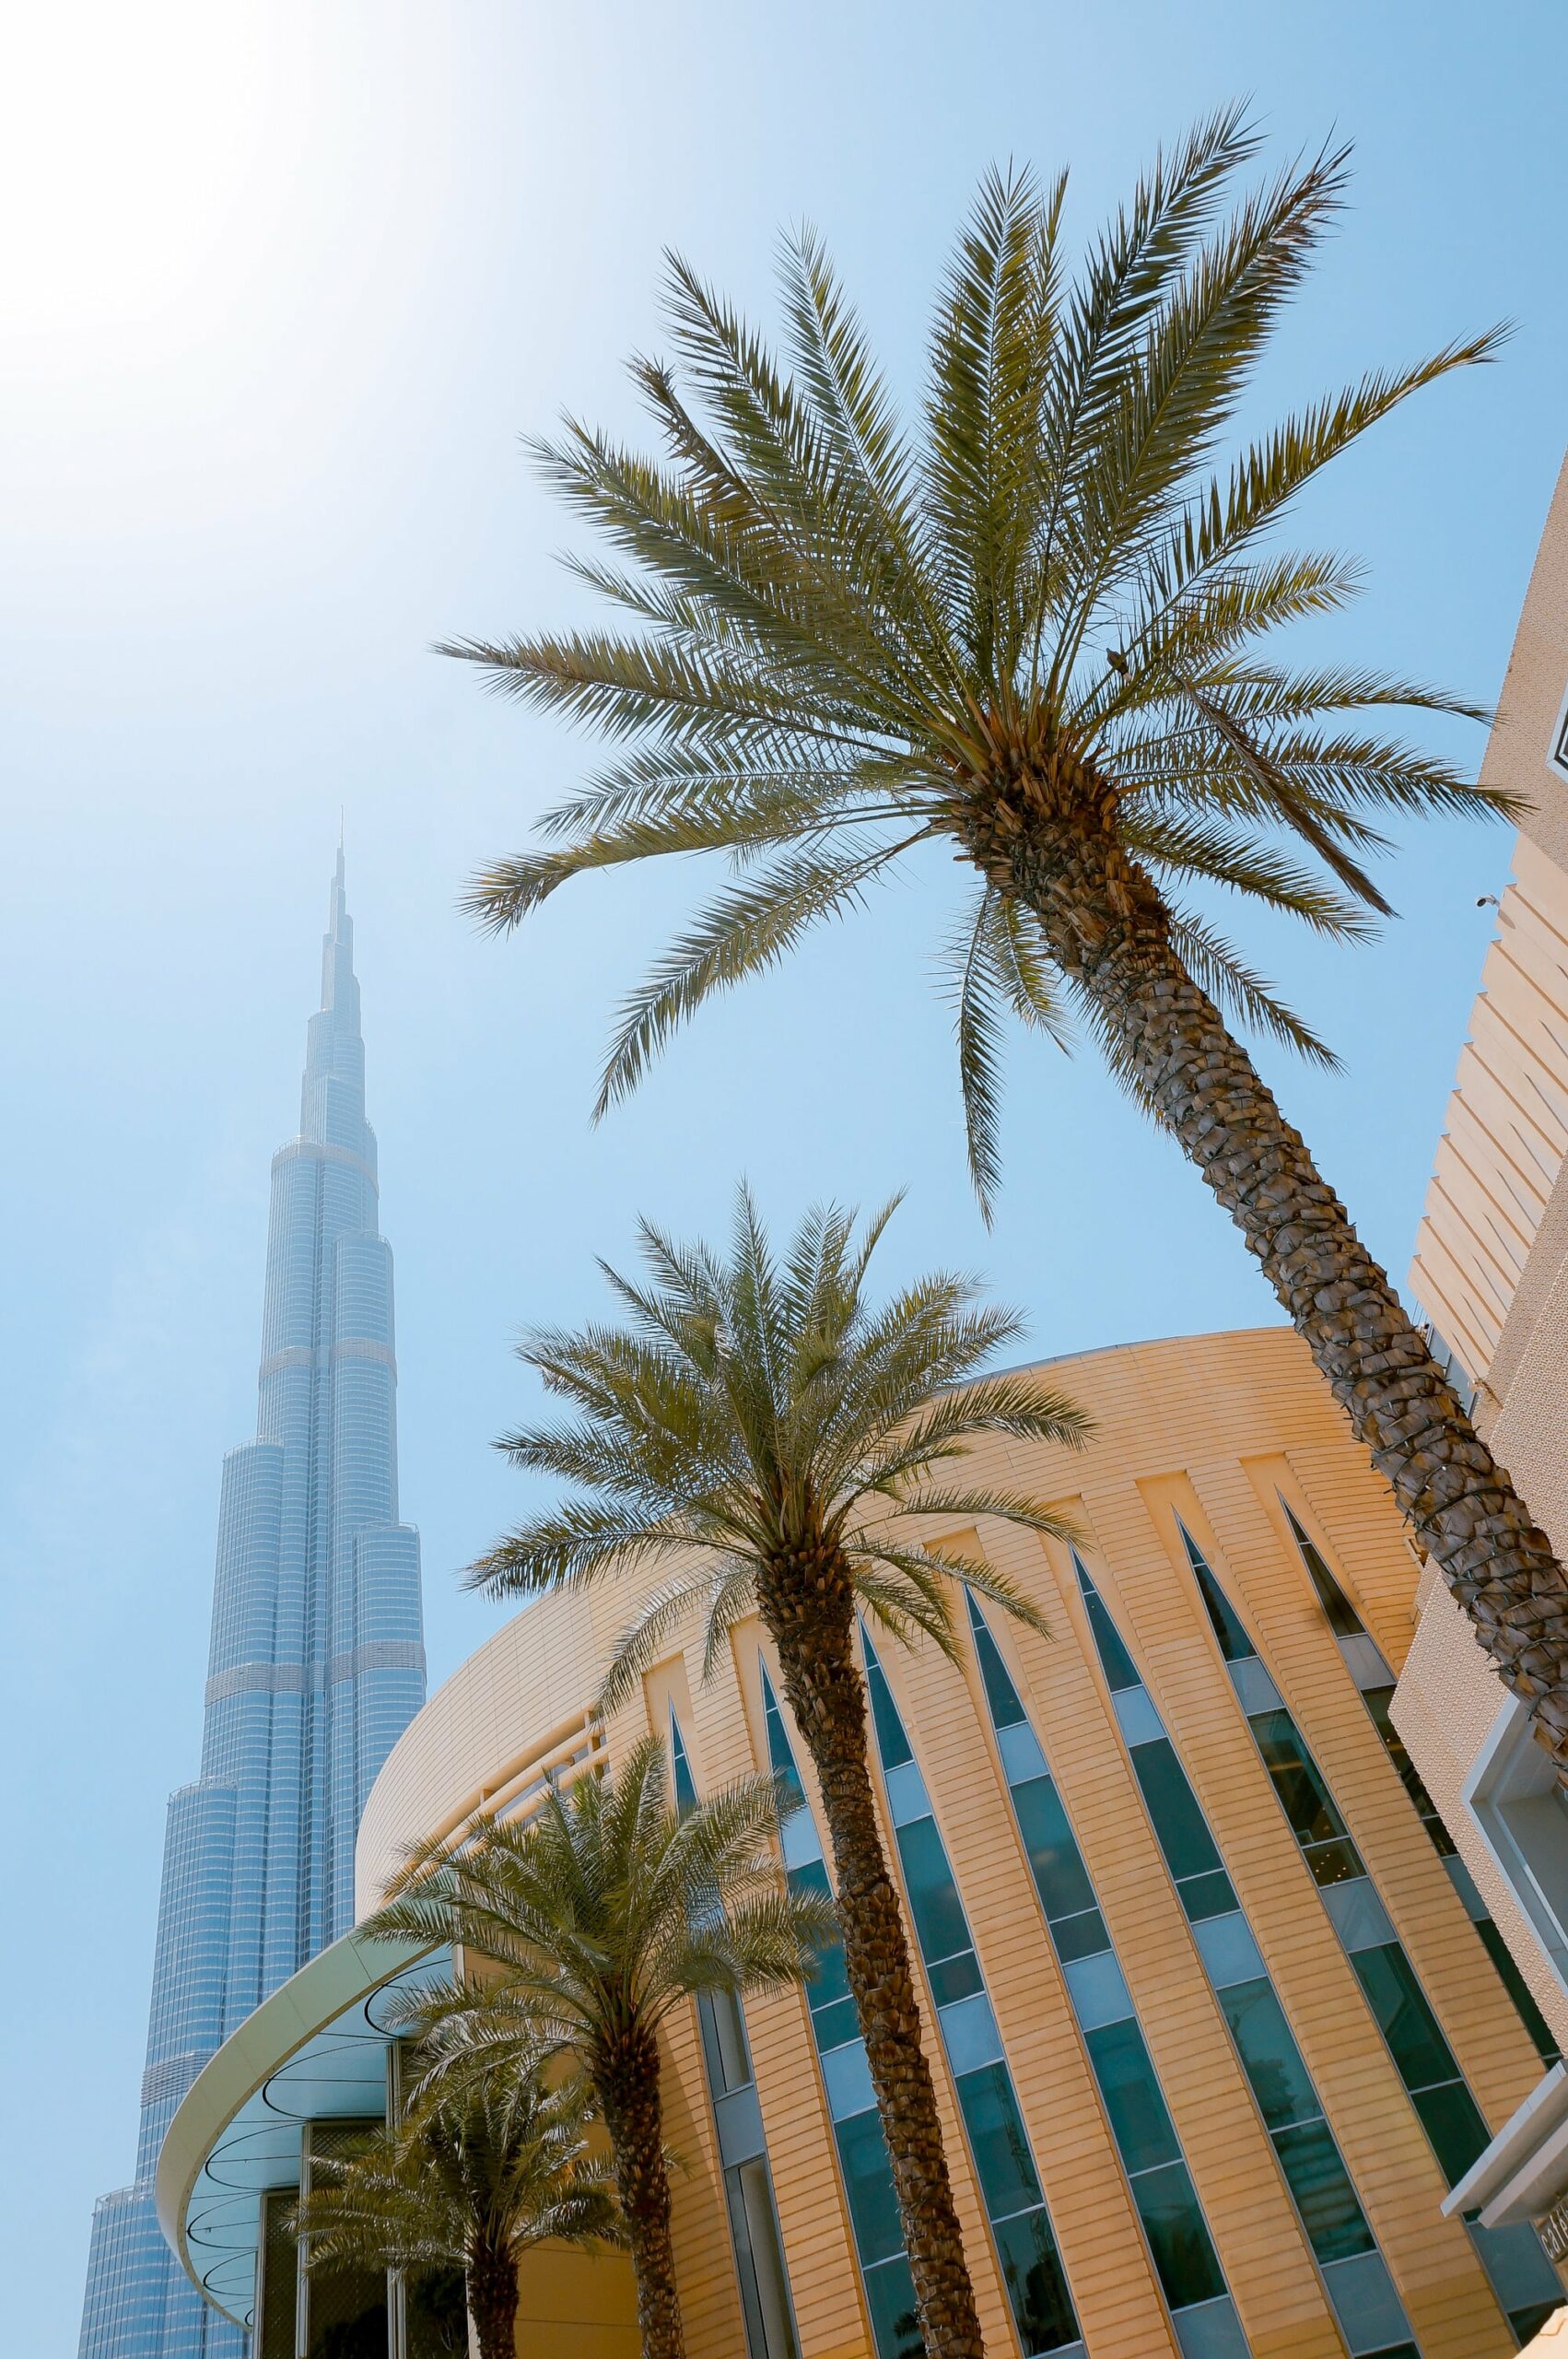 How Many Days Are Enough For Dubai Travel?